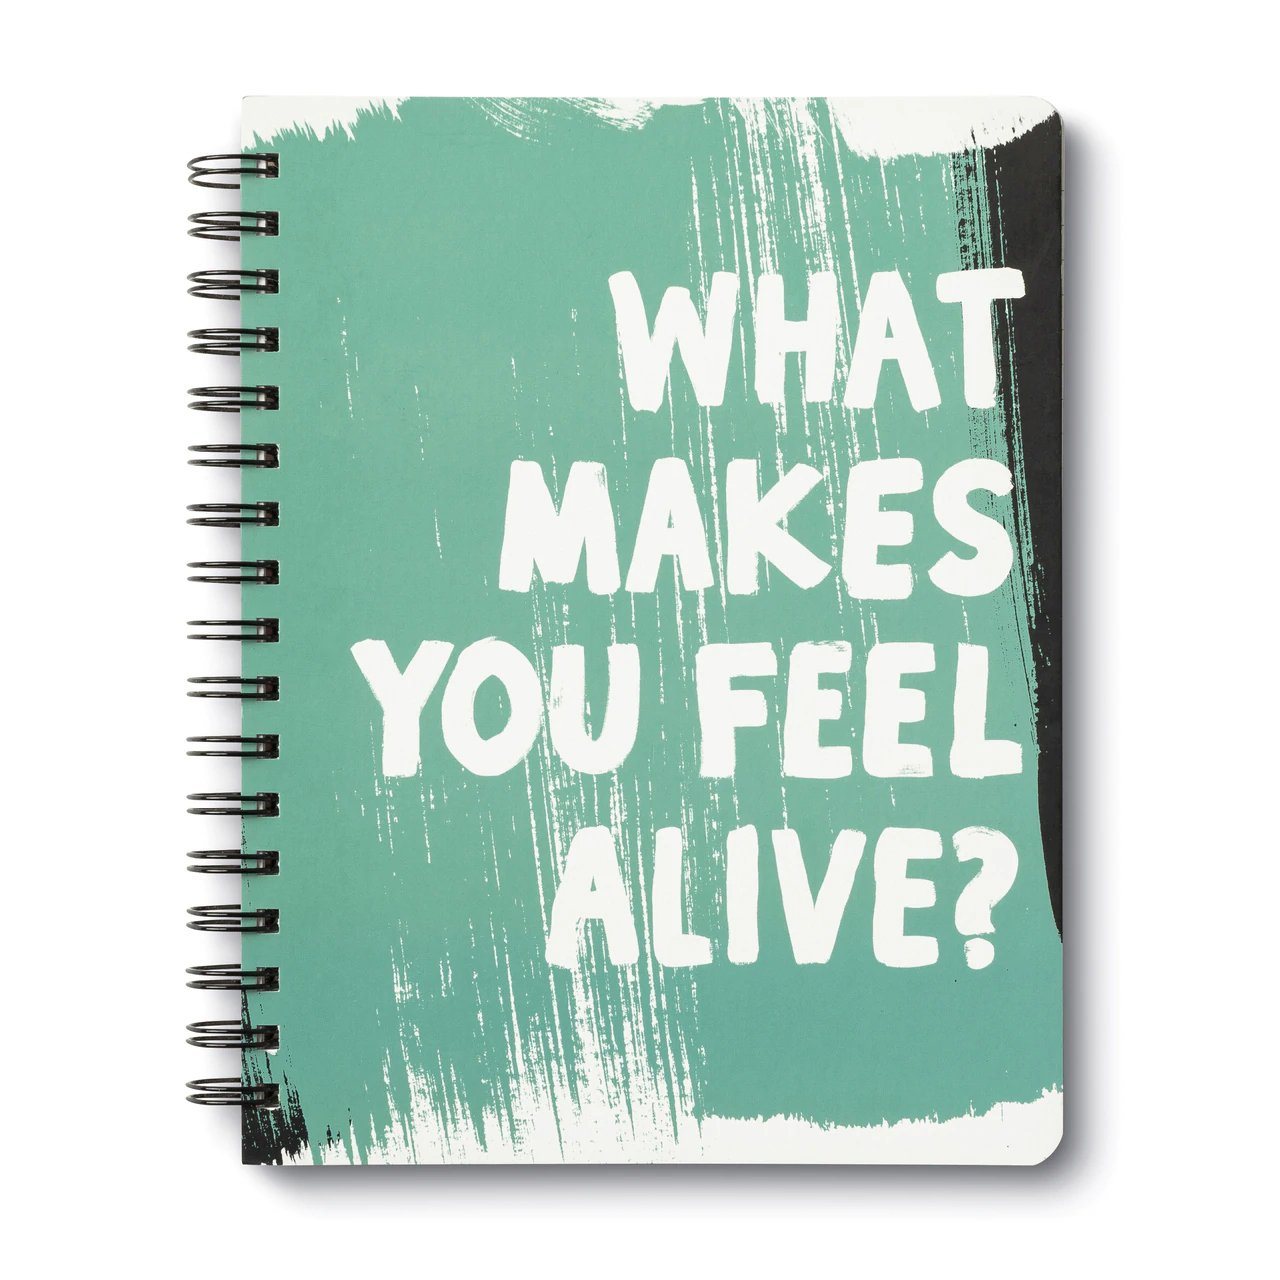 What Makes You Feel Alive